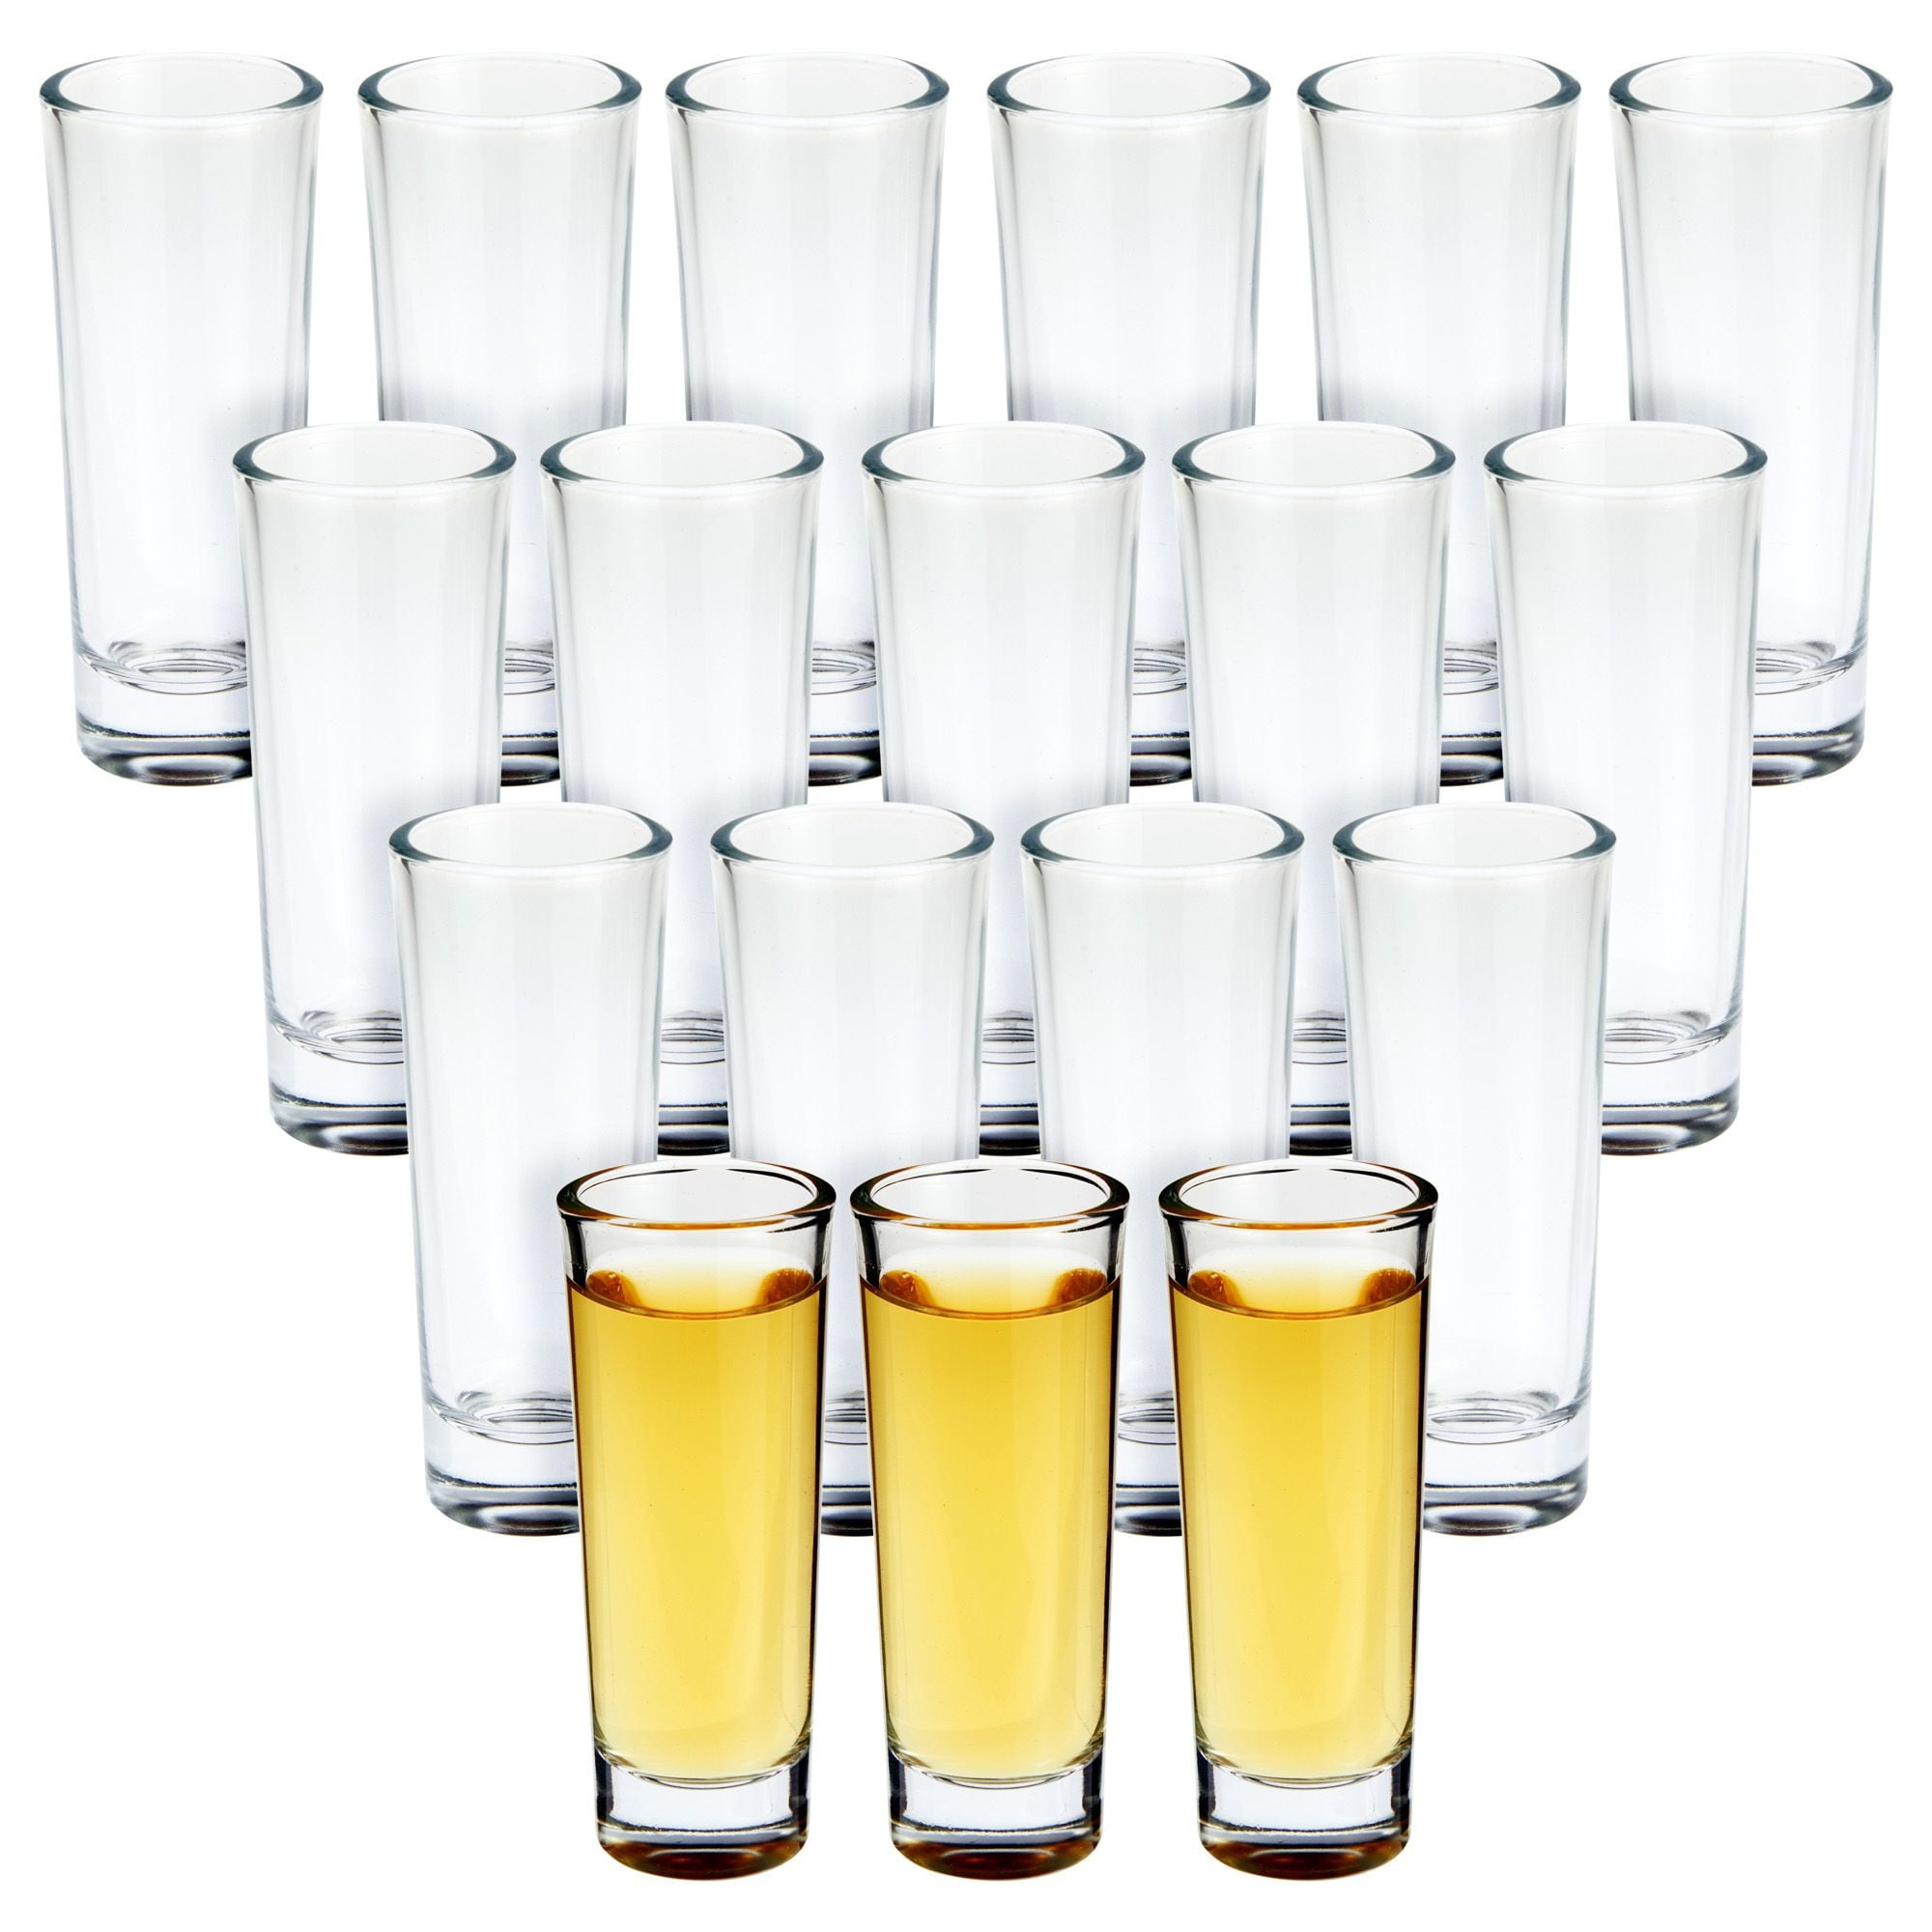 Wirester 1.5oz Crystal Shot Glass for Coffee Beer Wine Whiskey Vodka Milk Water & More - Boss Bitch, Size: One Size